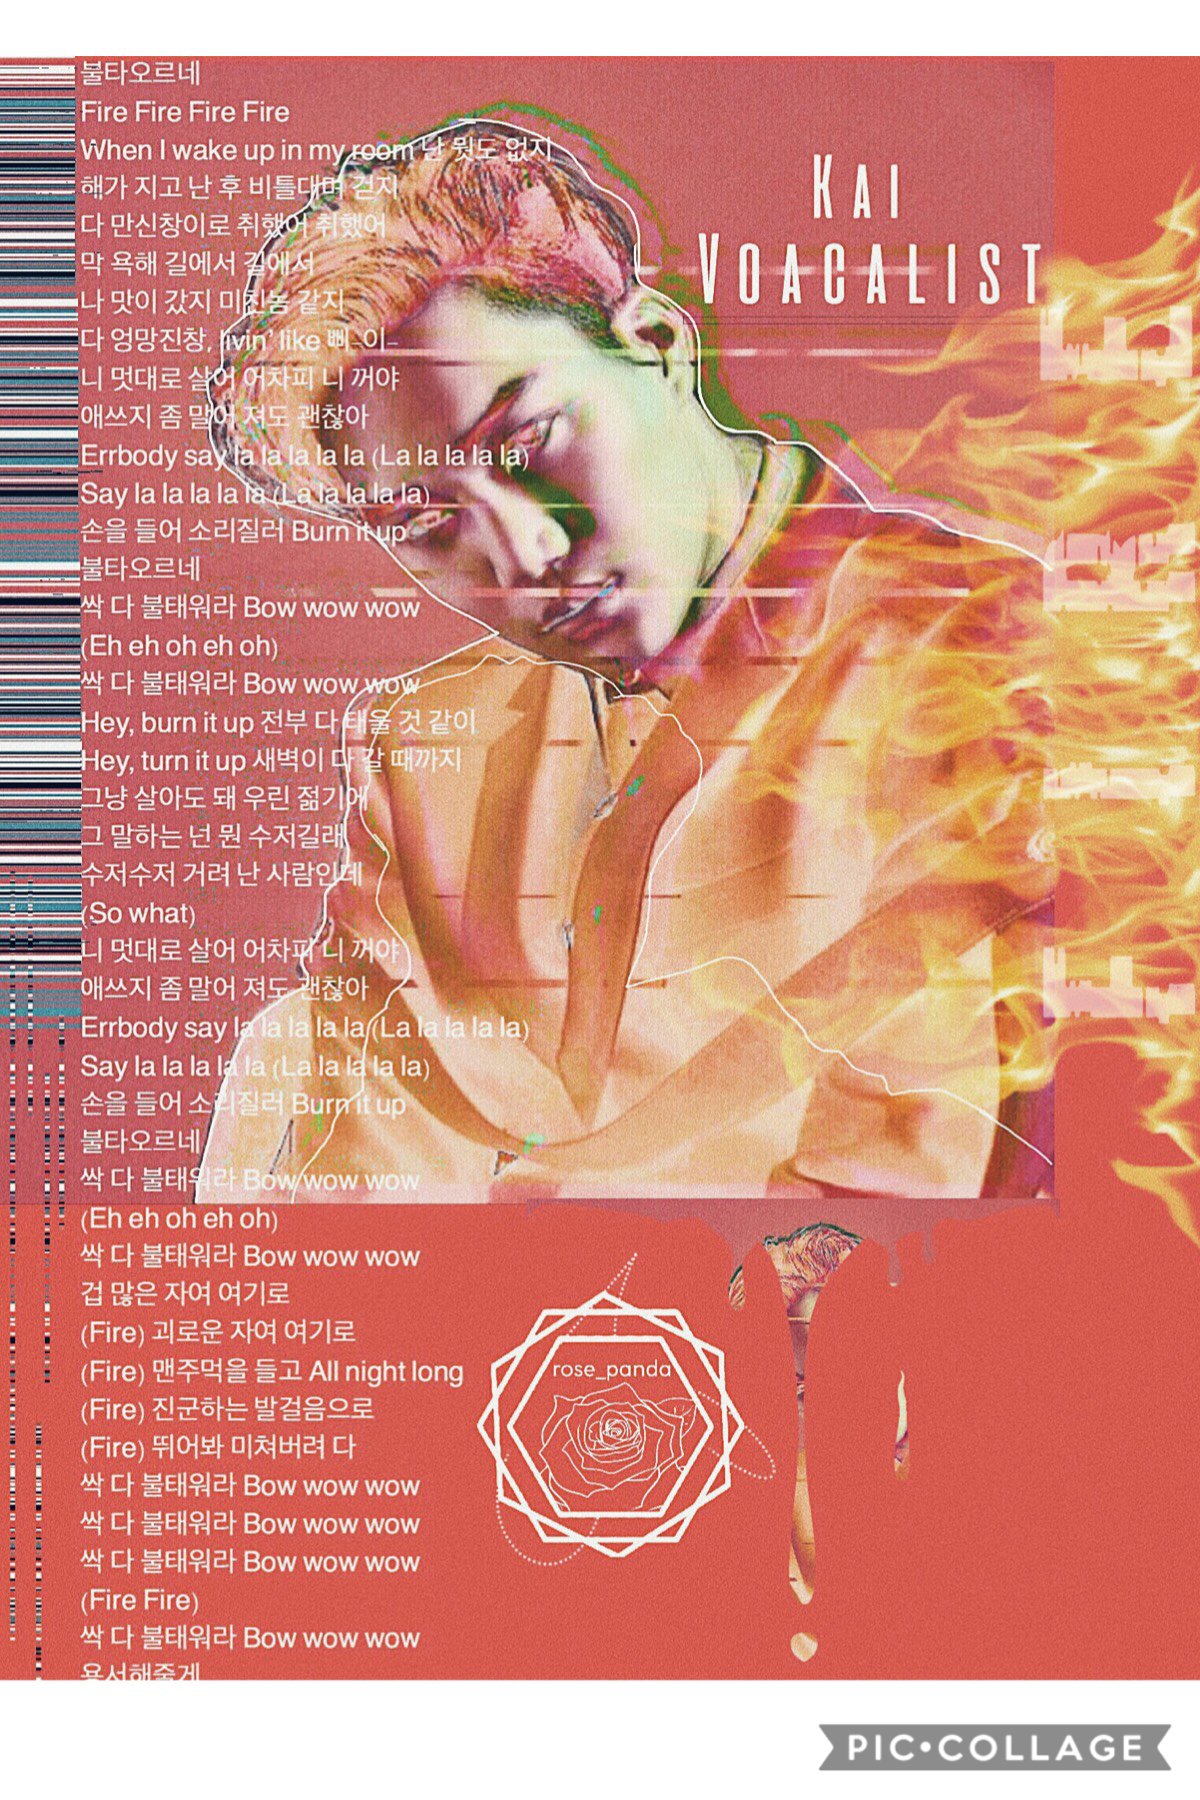 For @marksonyum kpop contest/games honestly this was a new style for me I tried to keep it “fiery” ig but I did add a bit of cool tones during filtering so it could balance out idk if you guys can see it or not and also can I be honest here sometimes duri